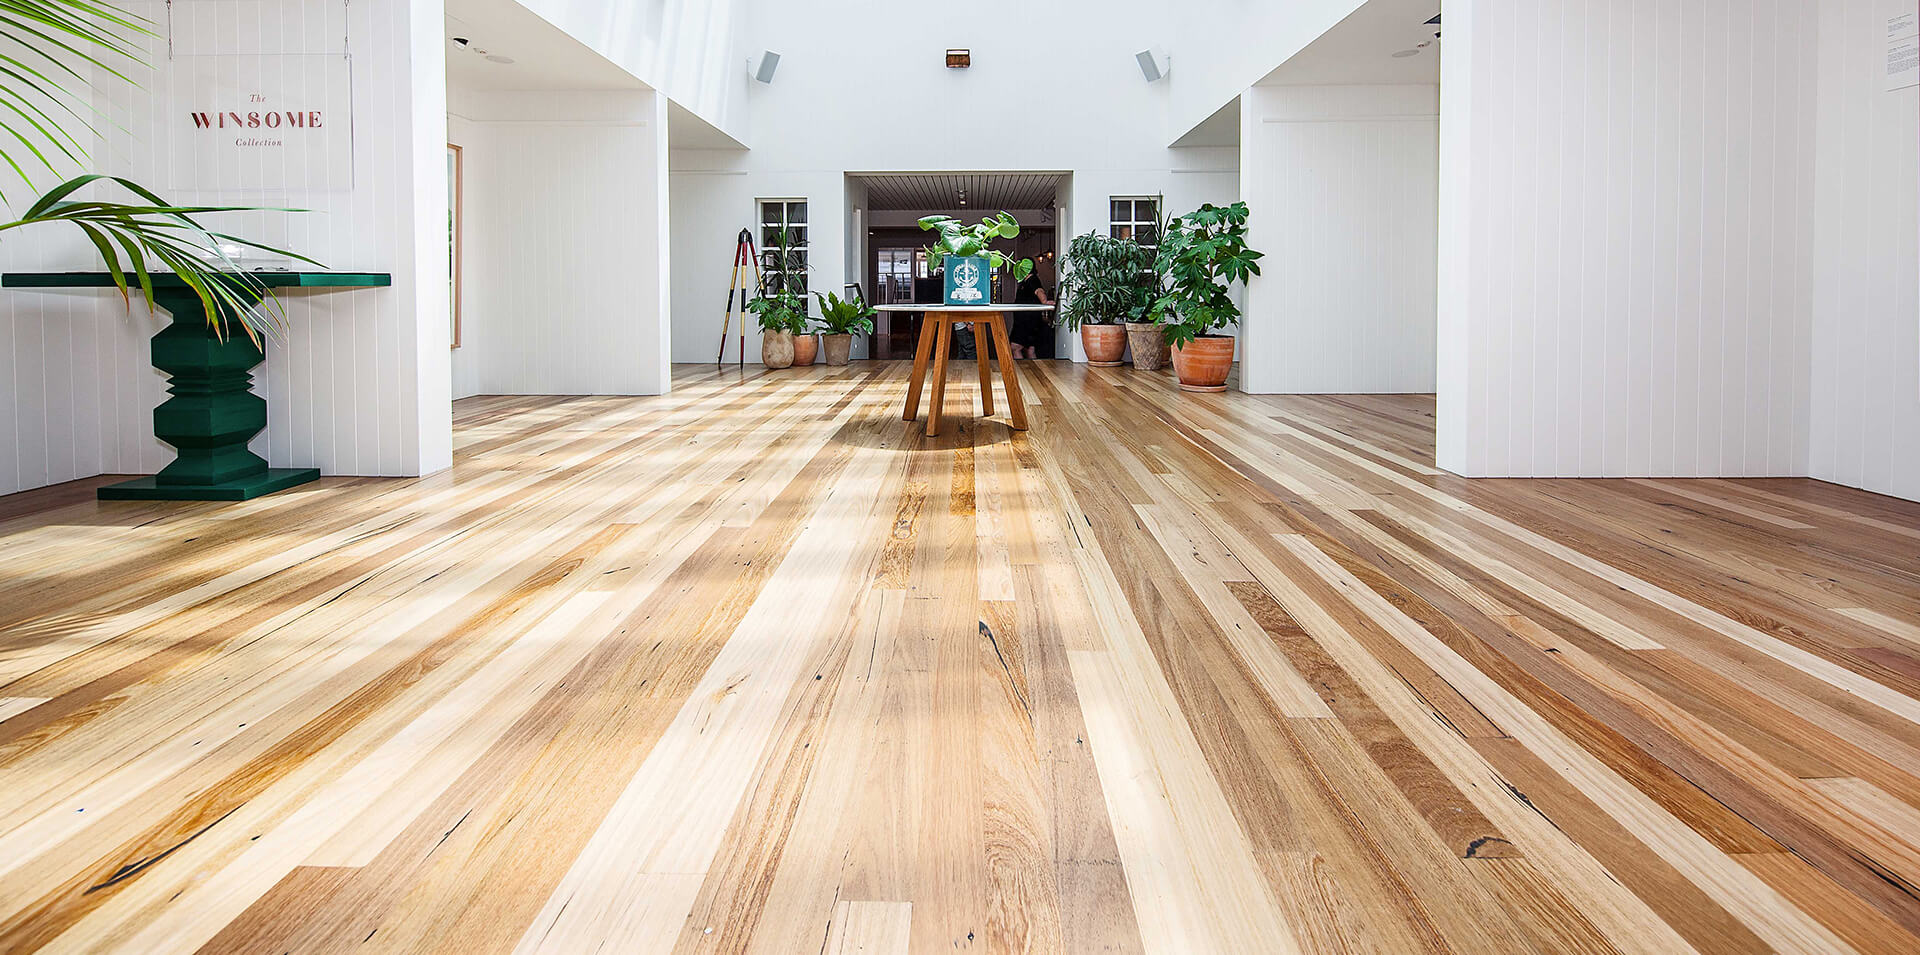 New & Recycled Timber Flooring Melbourne | SMT